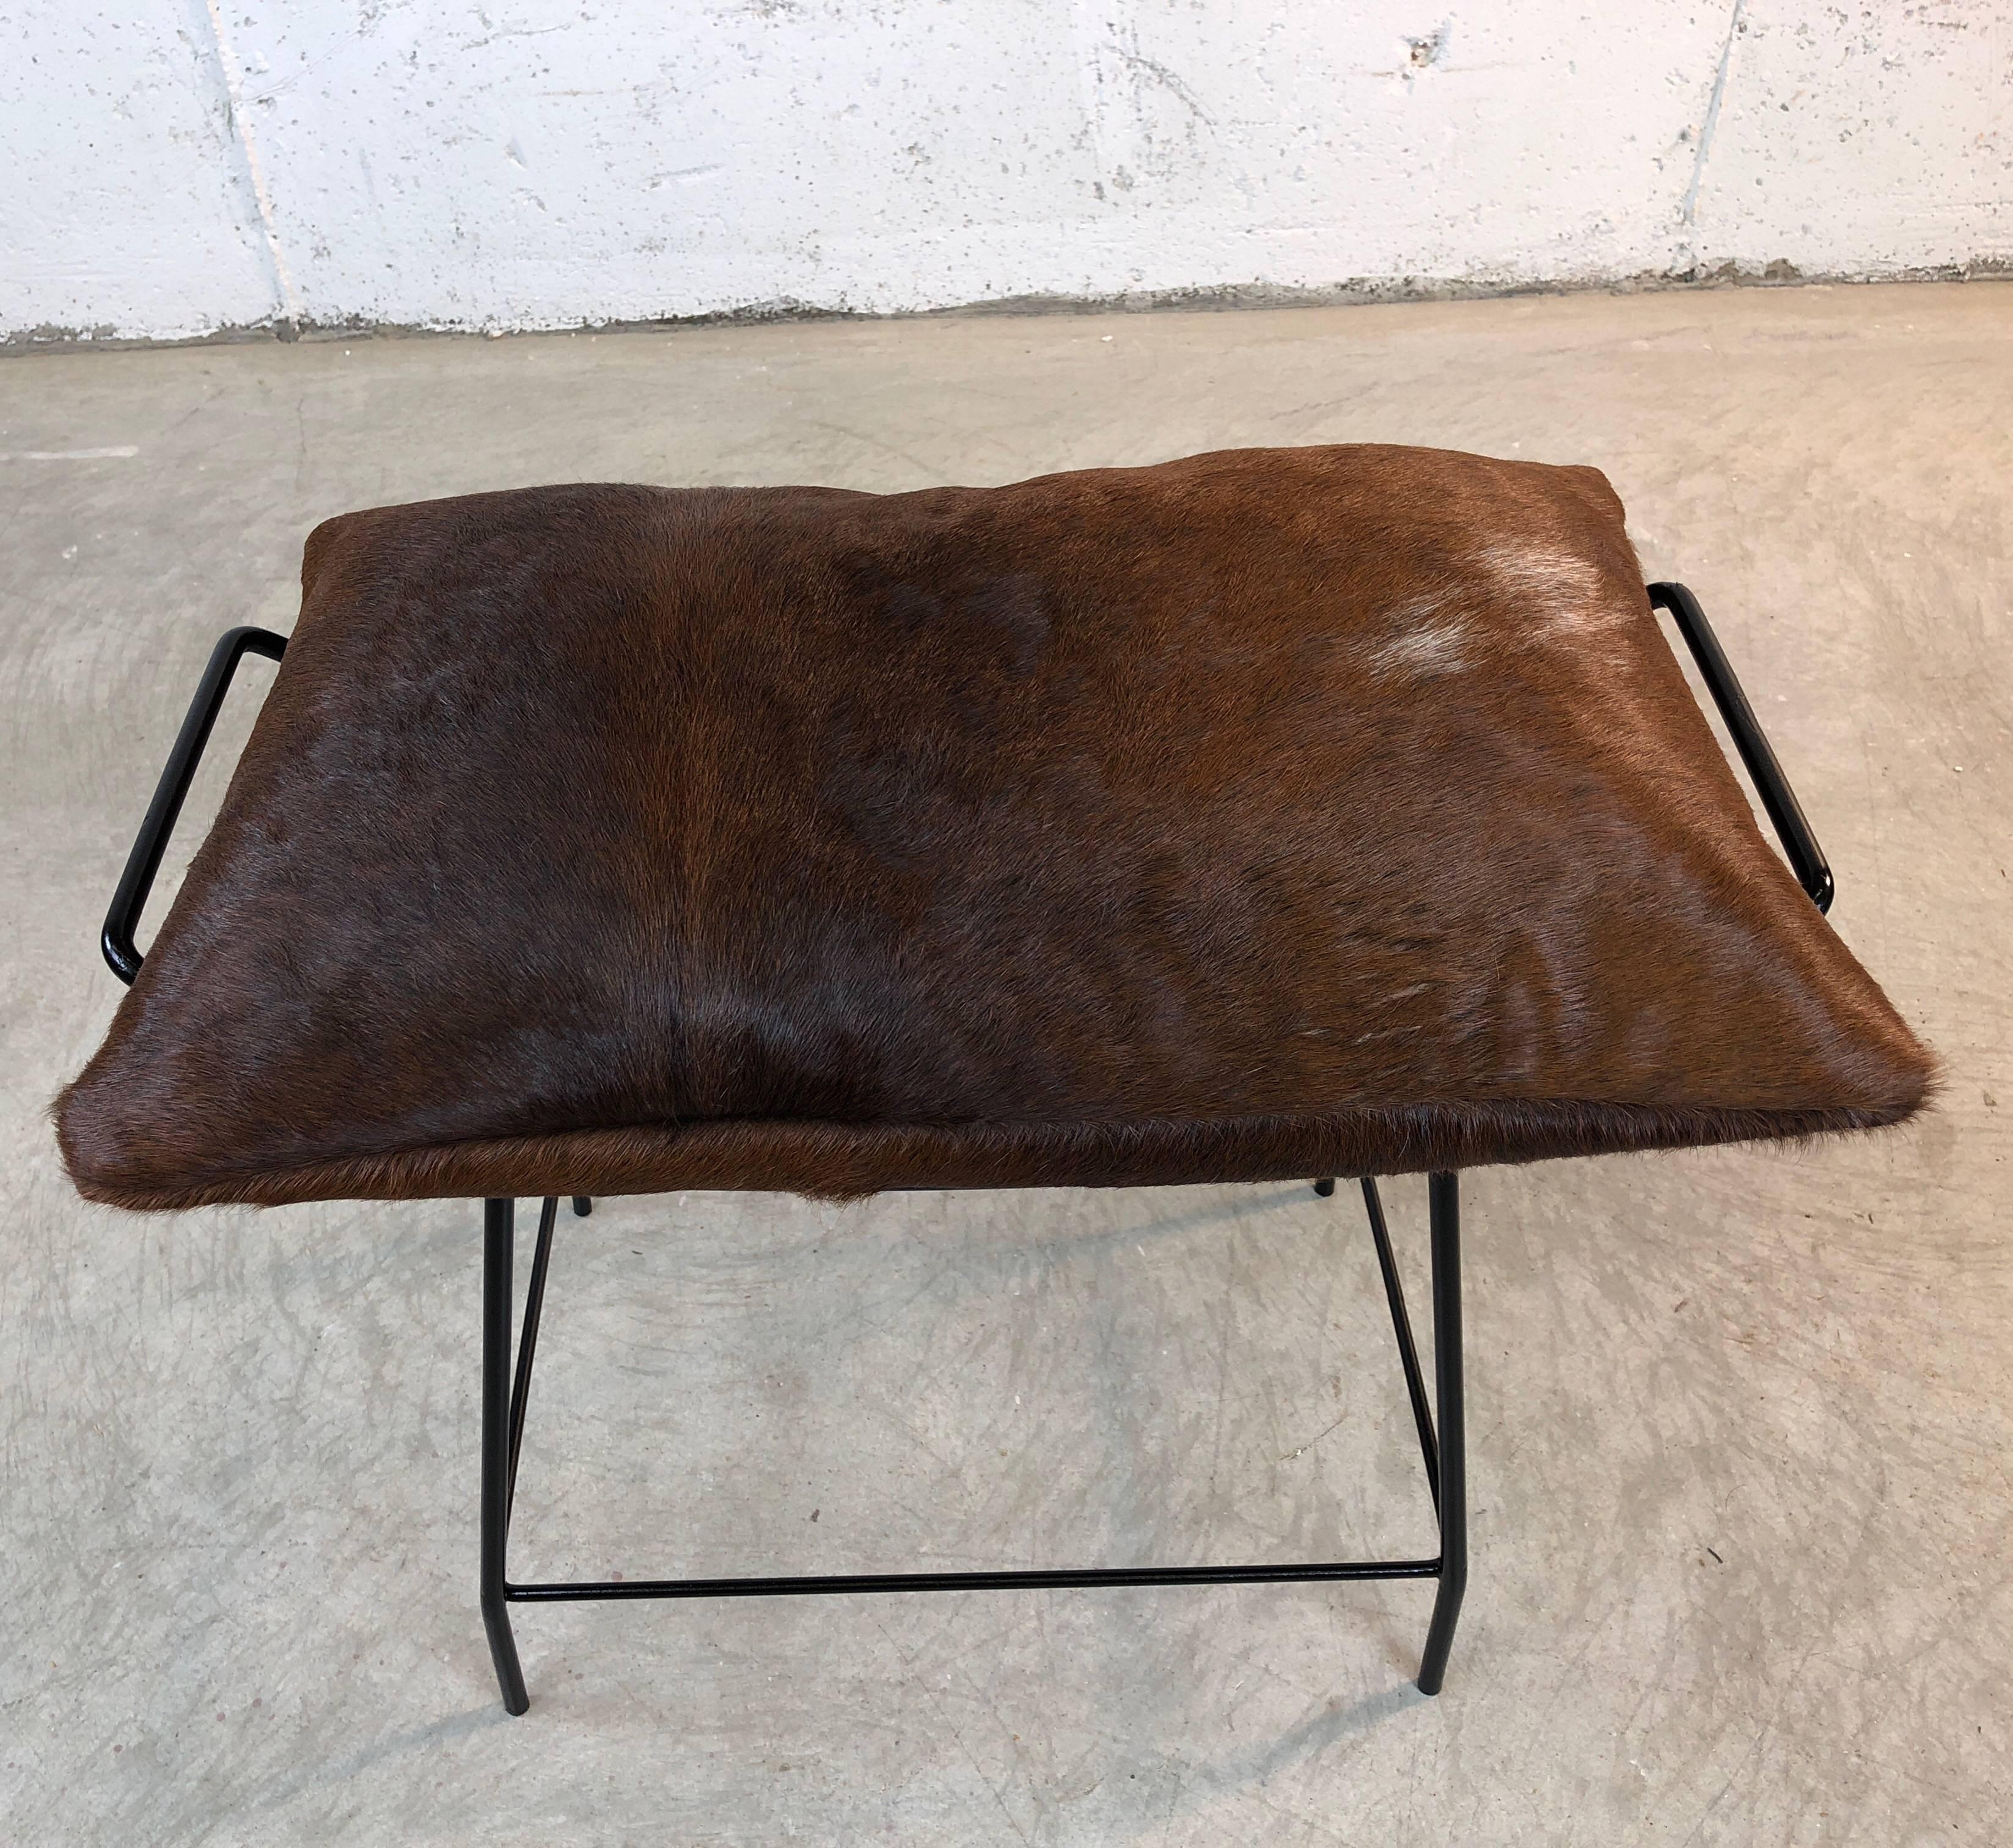 Mid-Century Modern black painted metal vanity stool with brown cowhide pillow. The vanity has handles and a mesh base and is newly refinished. The pillow is new cowhide. No marks. 

Measures: 21, 11, 18.